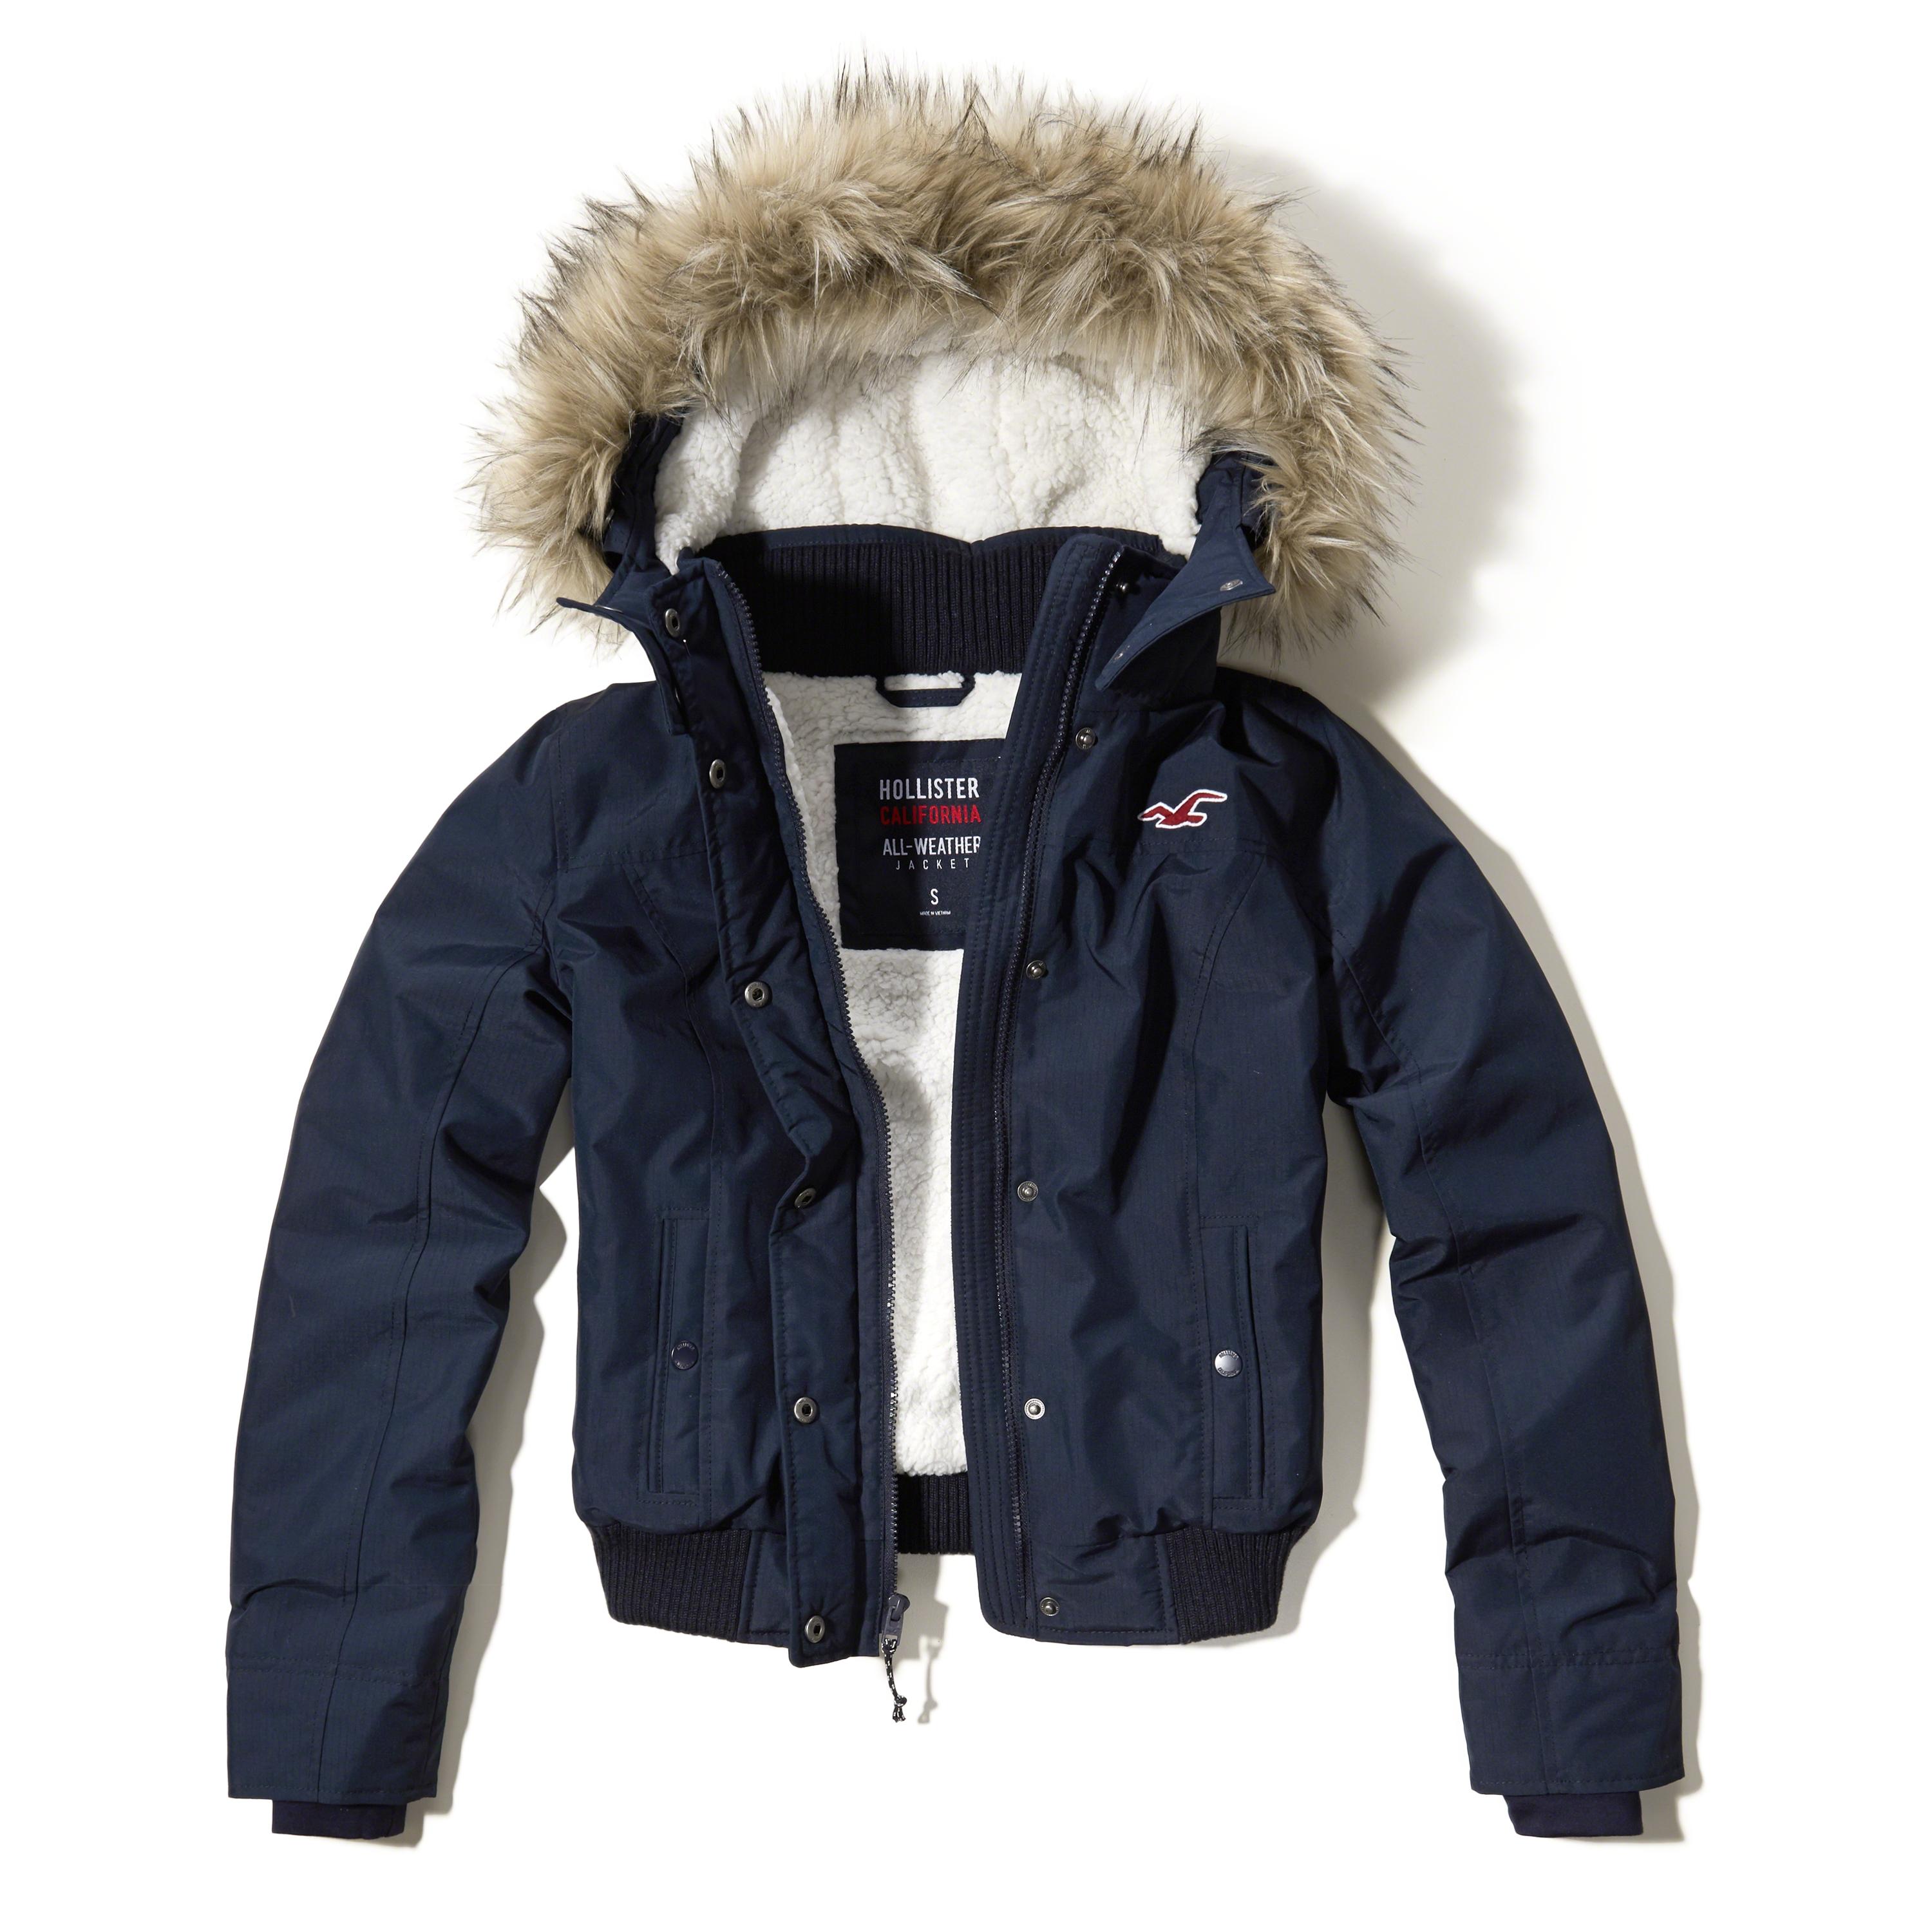 Hollister All-weather Sherpa Lined Bomber Jacket in Blue | Lyst